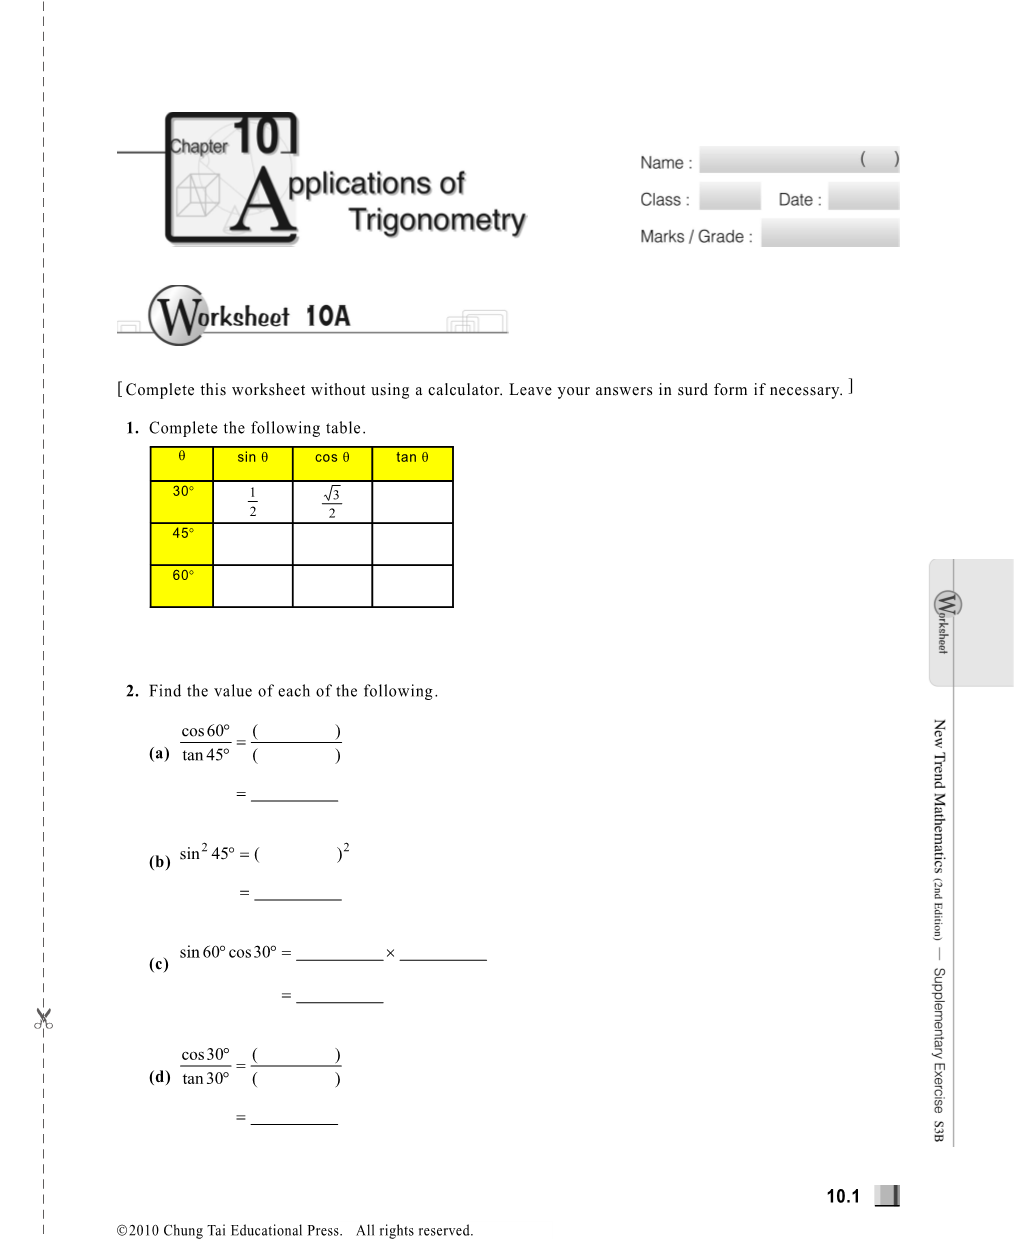 Complete This Worksheet Without Using a Calculator. Leave Your Answers in Surd Form If